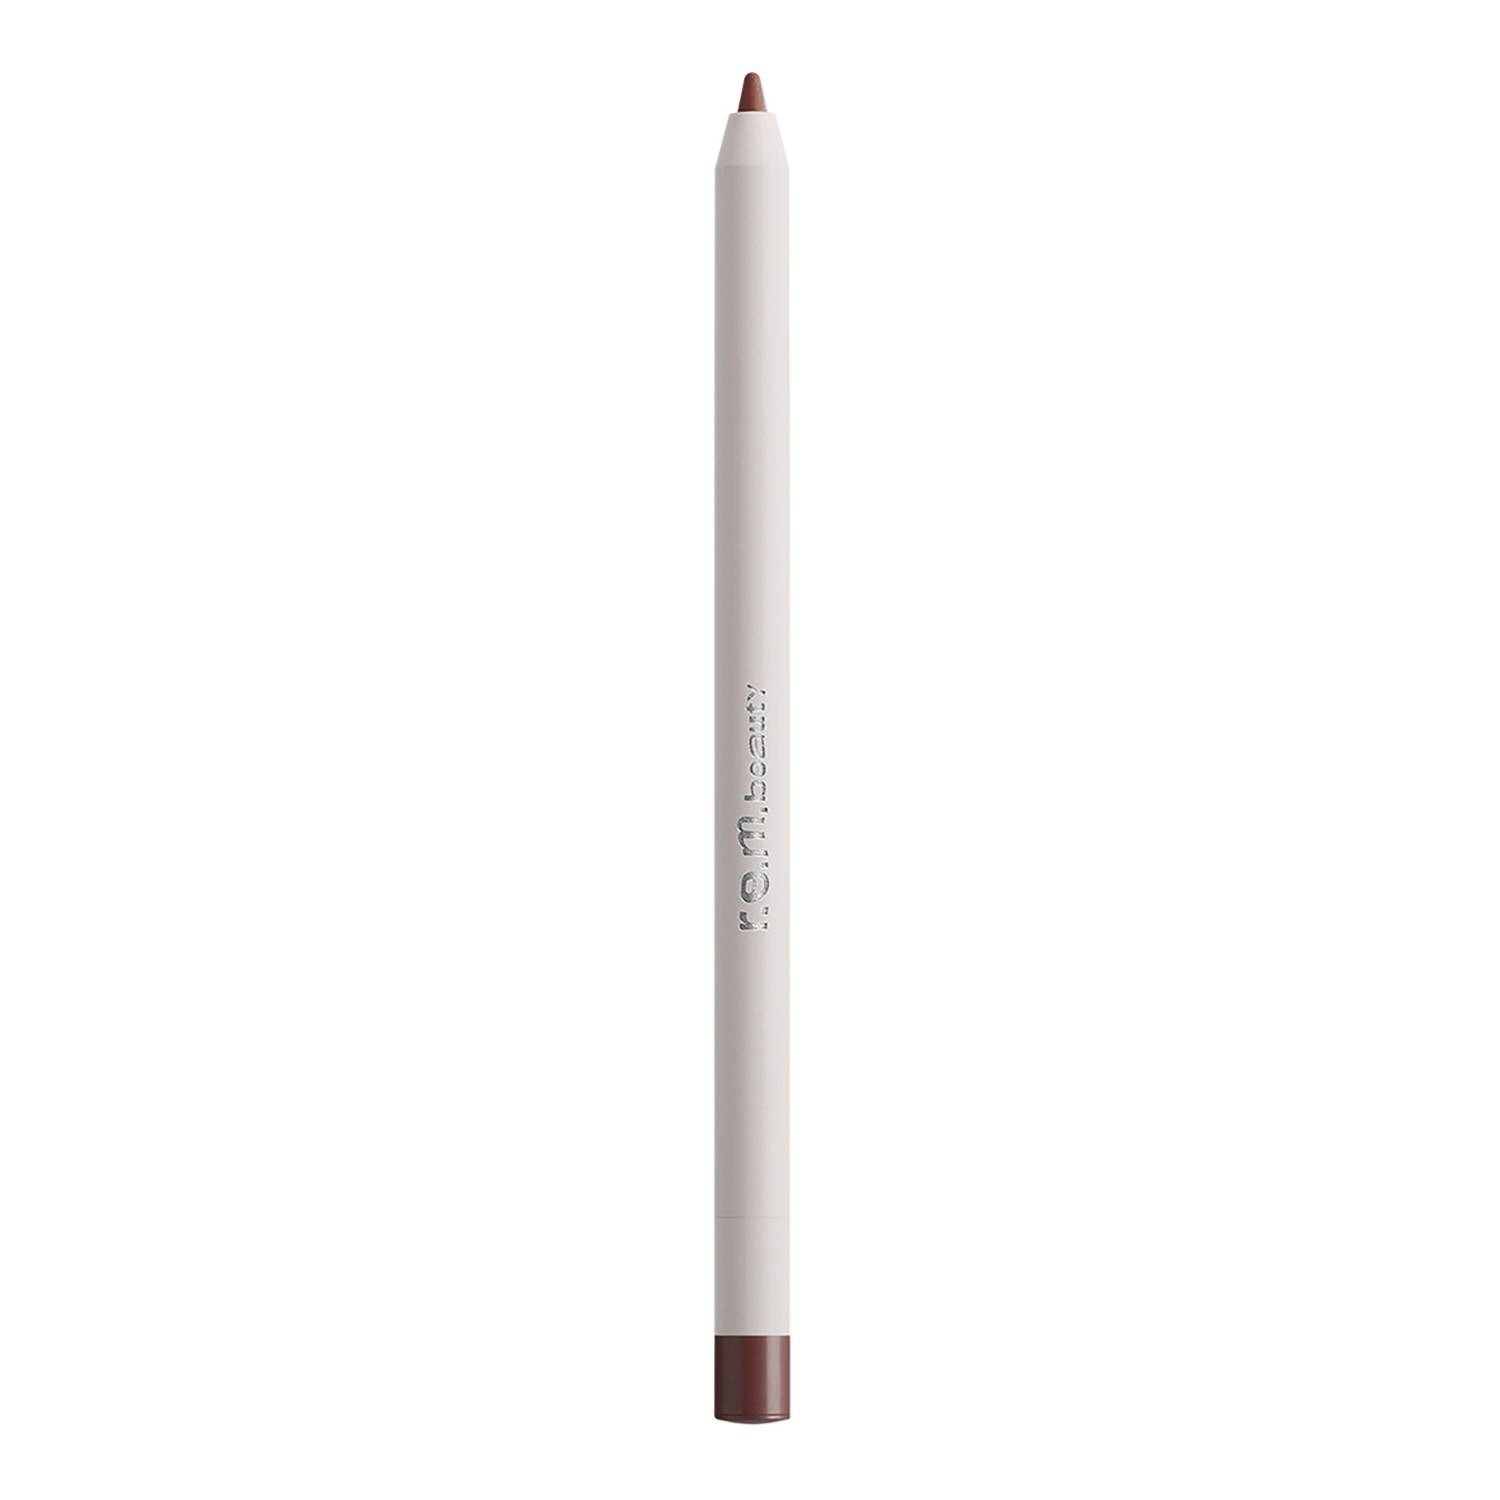 Rem Beauty At The Borderline Lip Liner Pencil 0.5G Reverb Chocolate Brown 0.50G